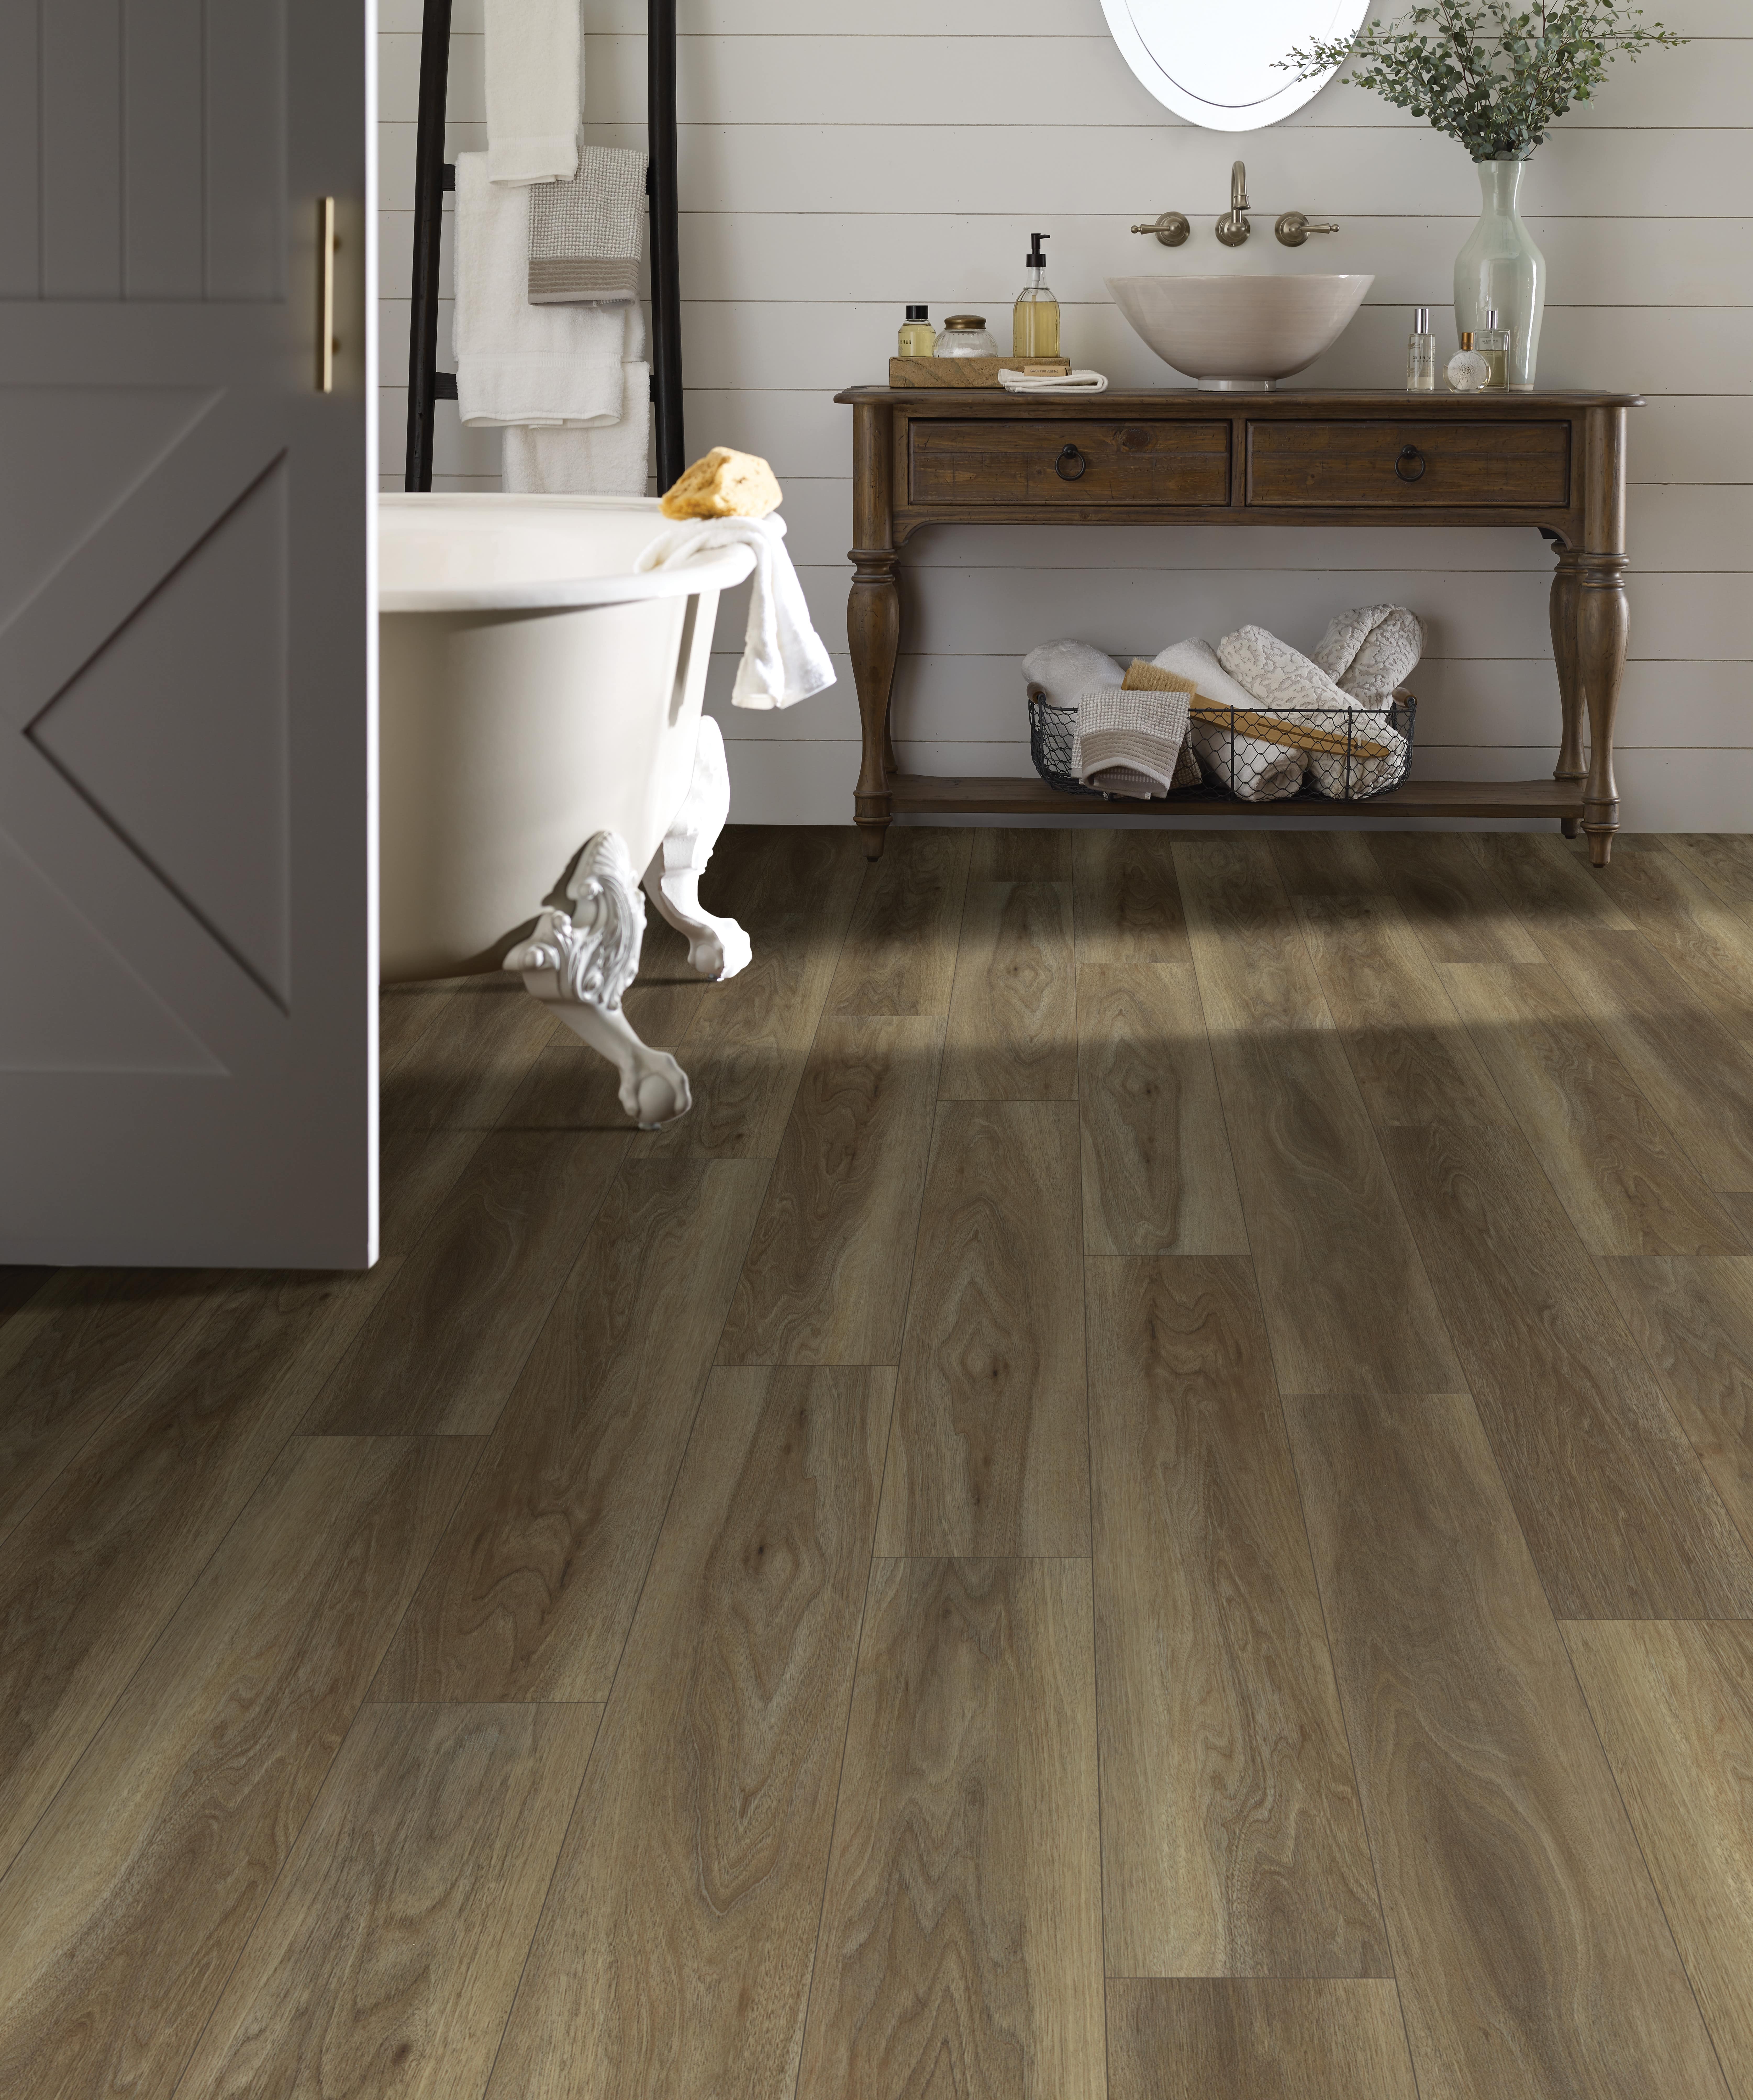 Wood Floor Bathrooms How To Do Them, How To Install Laminate Wood Flooring In Bathroom